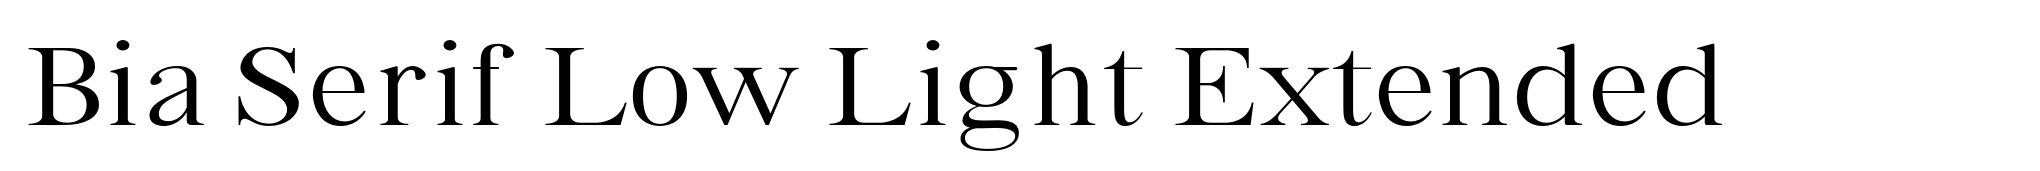 Bia Serif Low Light Extended image